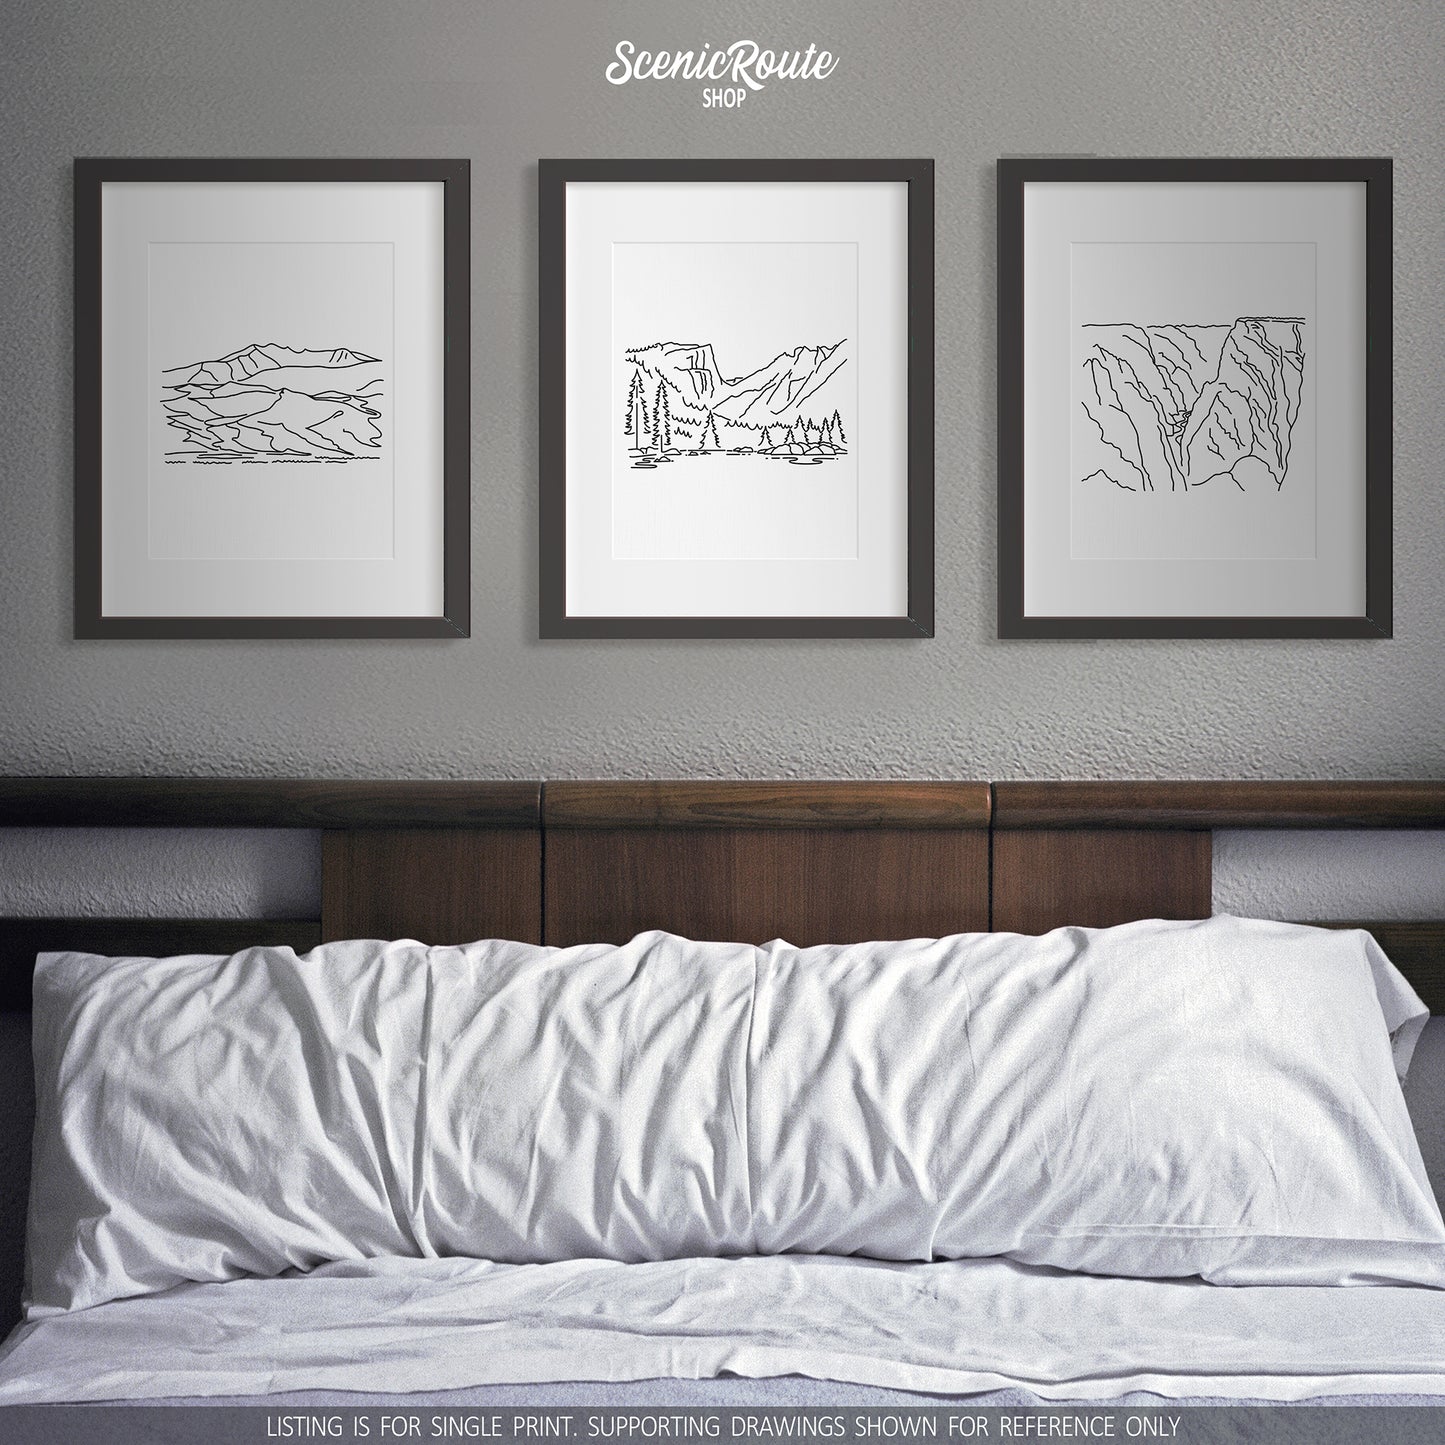 A group of three framed drawings on a wall above a bed. The line art drawings include Great Sand Dunes National Park, Rocky Mountain National Park, and Black Canyon of the Gunnison National Park